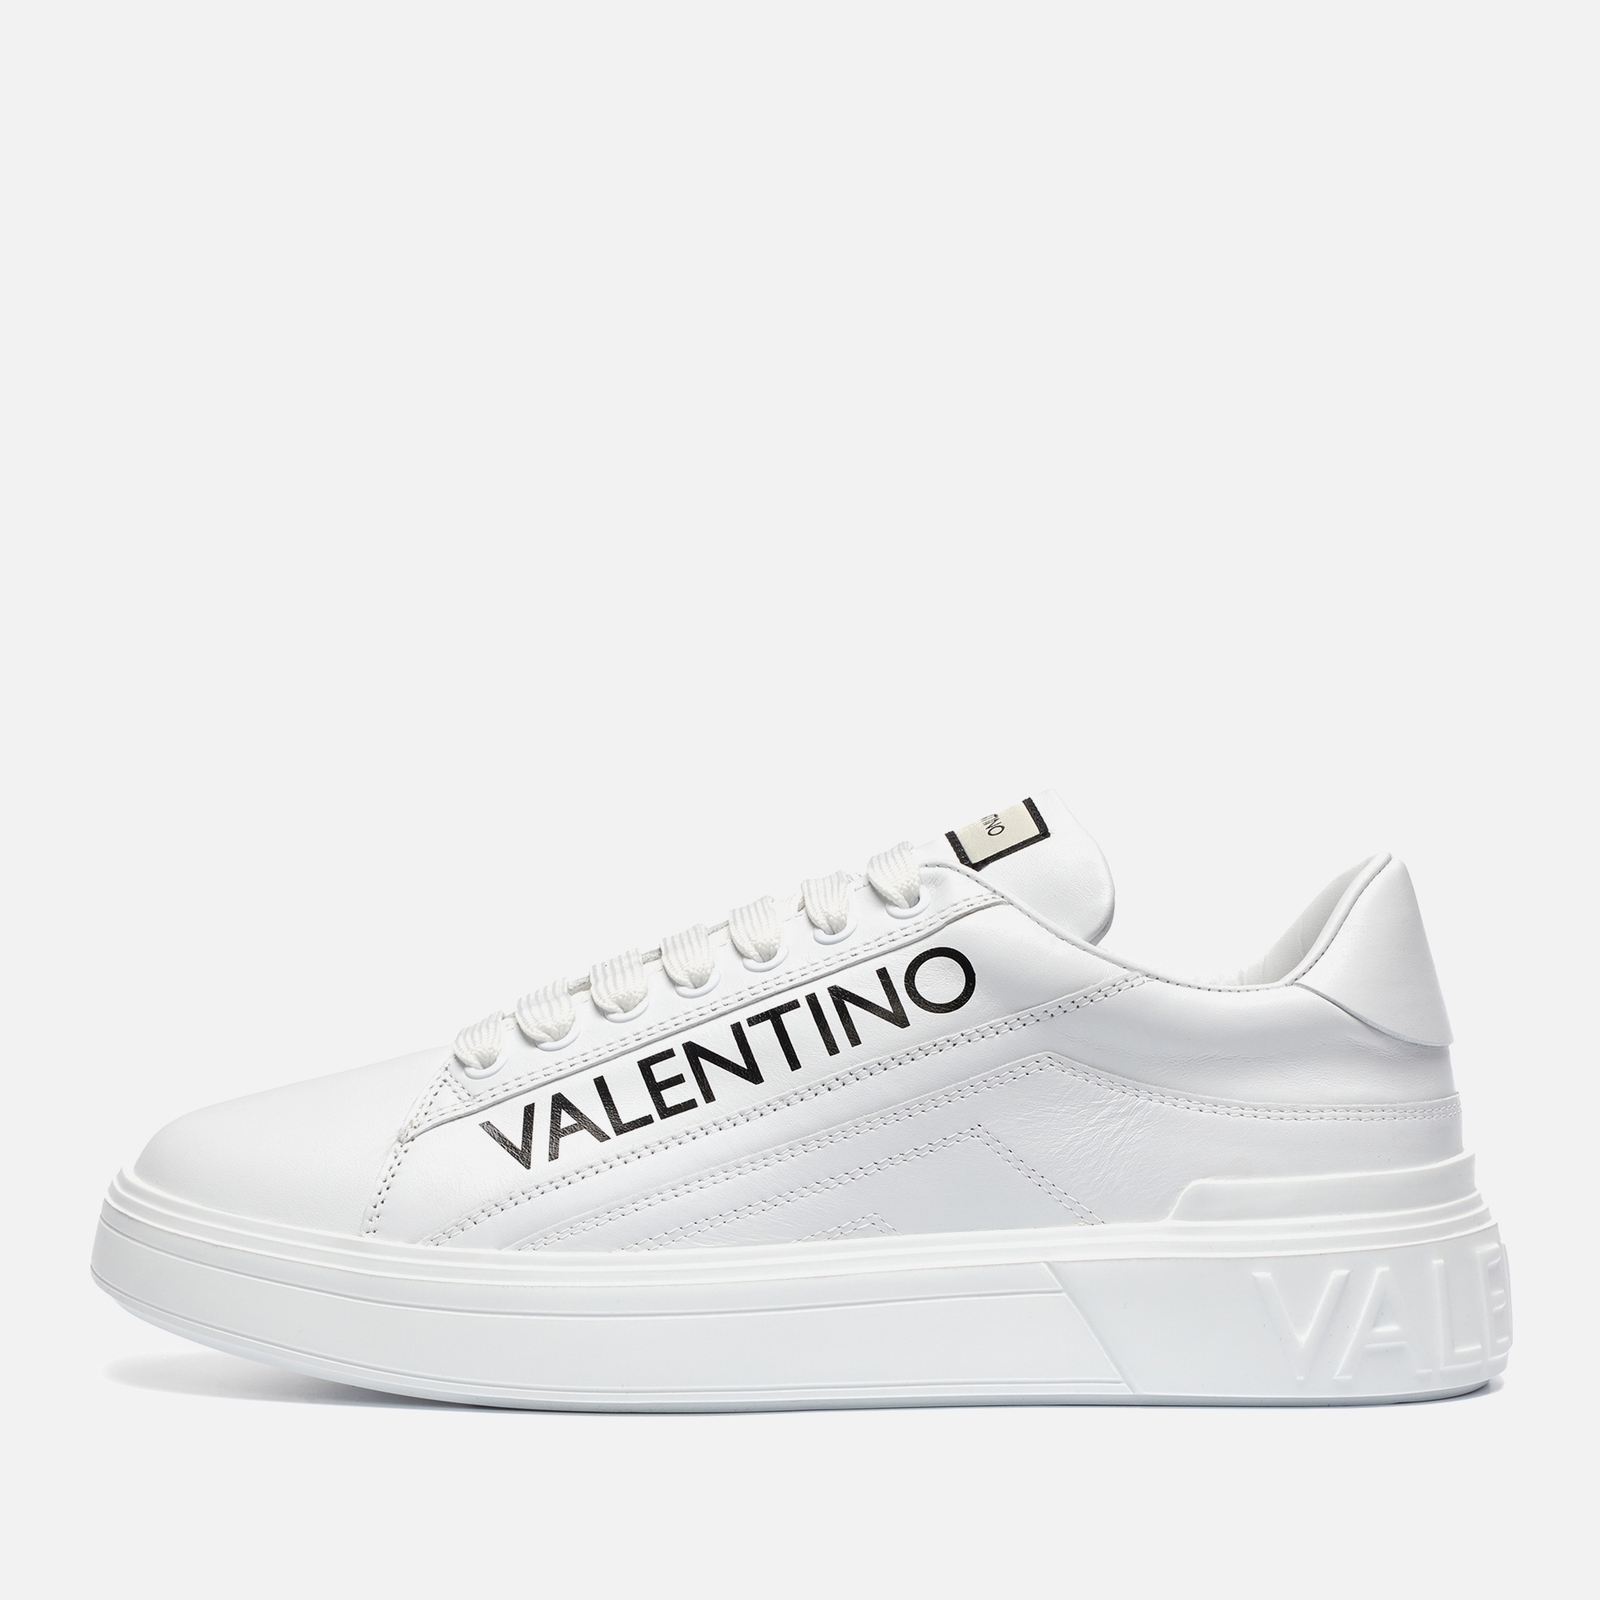 Valentino Men's Rey Leather Low Top Trainers - White/Black